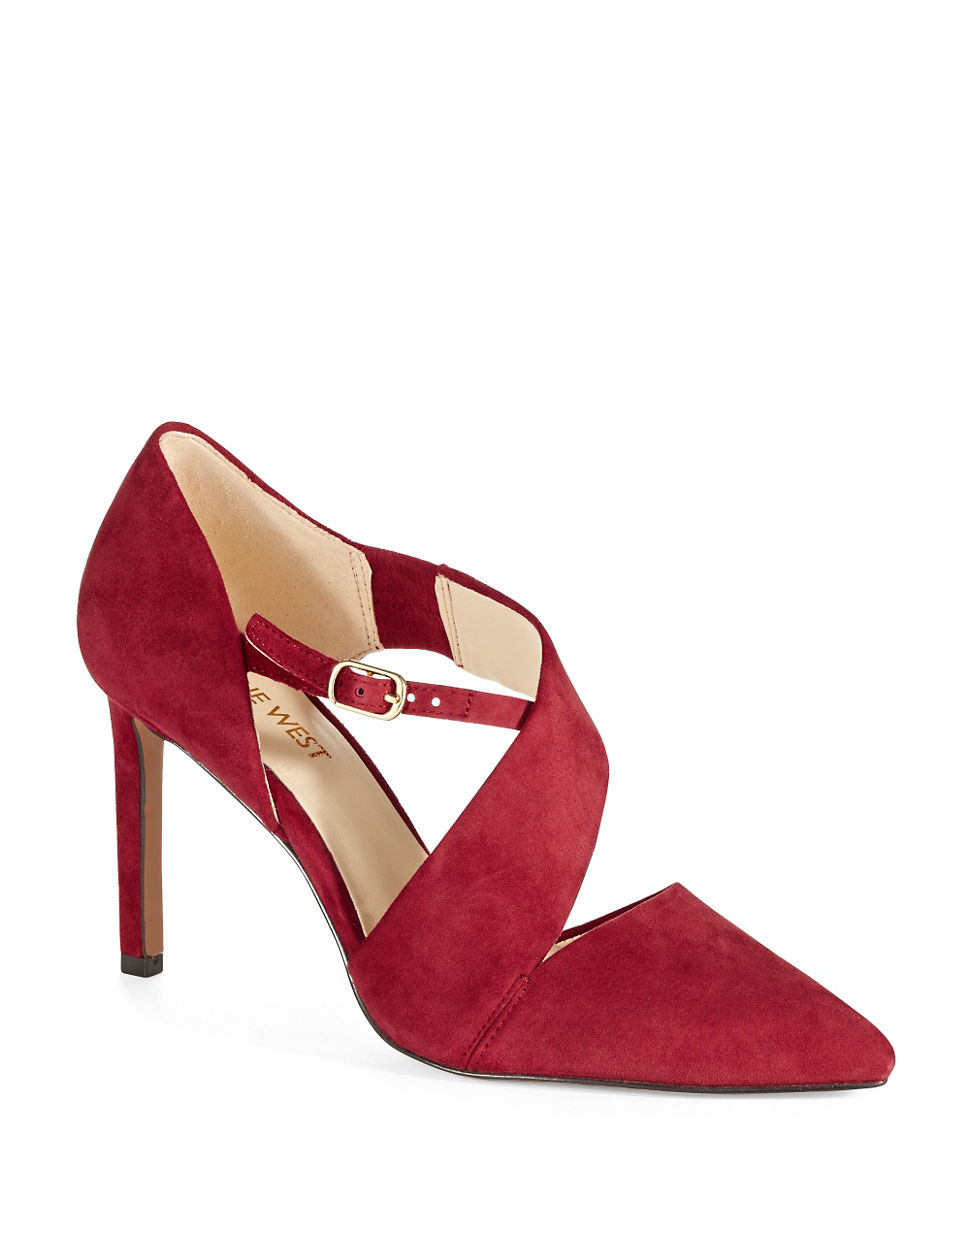 Nine West Chillice Strappy Heels in Red | Lyst